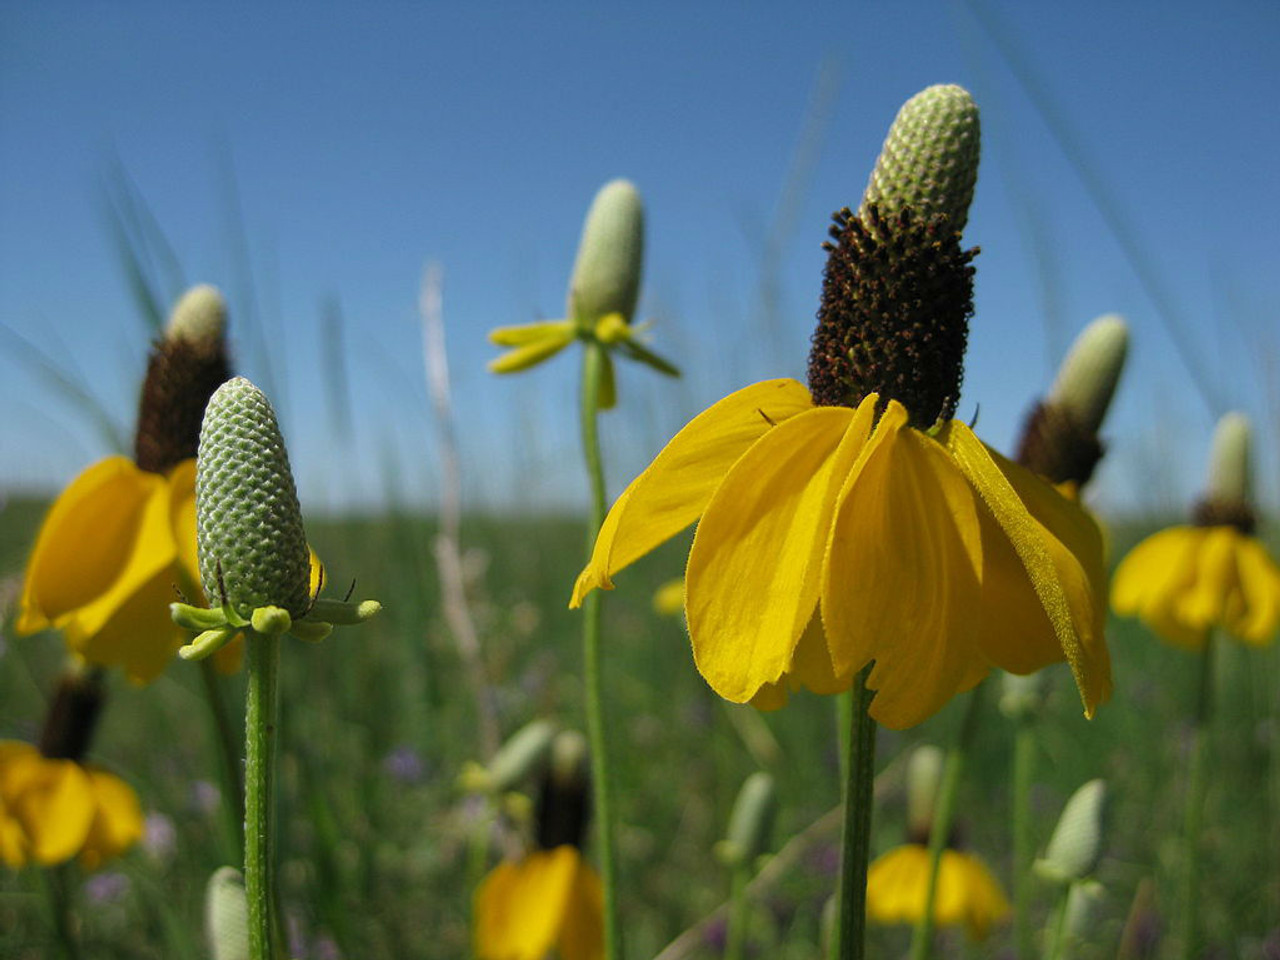 Ratibida columnifera - Mexican Hat - Upright Prairie Coneflower - beautiful native perennial and great butterfly plant for prairie or naturalized planting